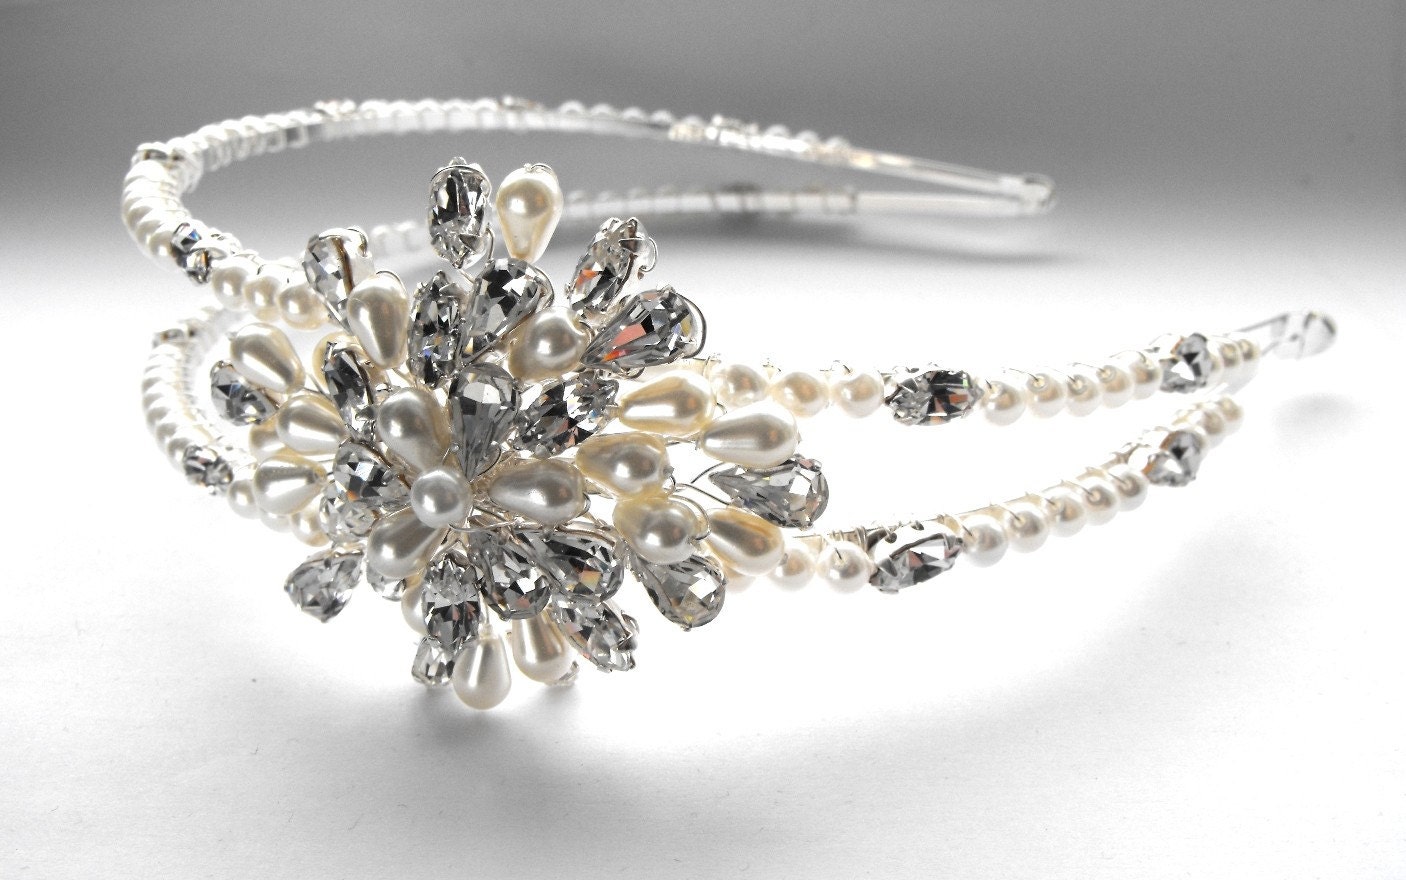 Pearl and Diamante double headband by LaurelLime